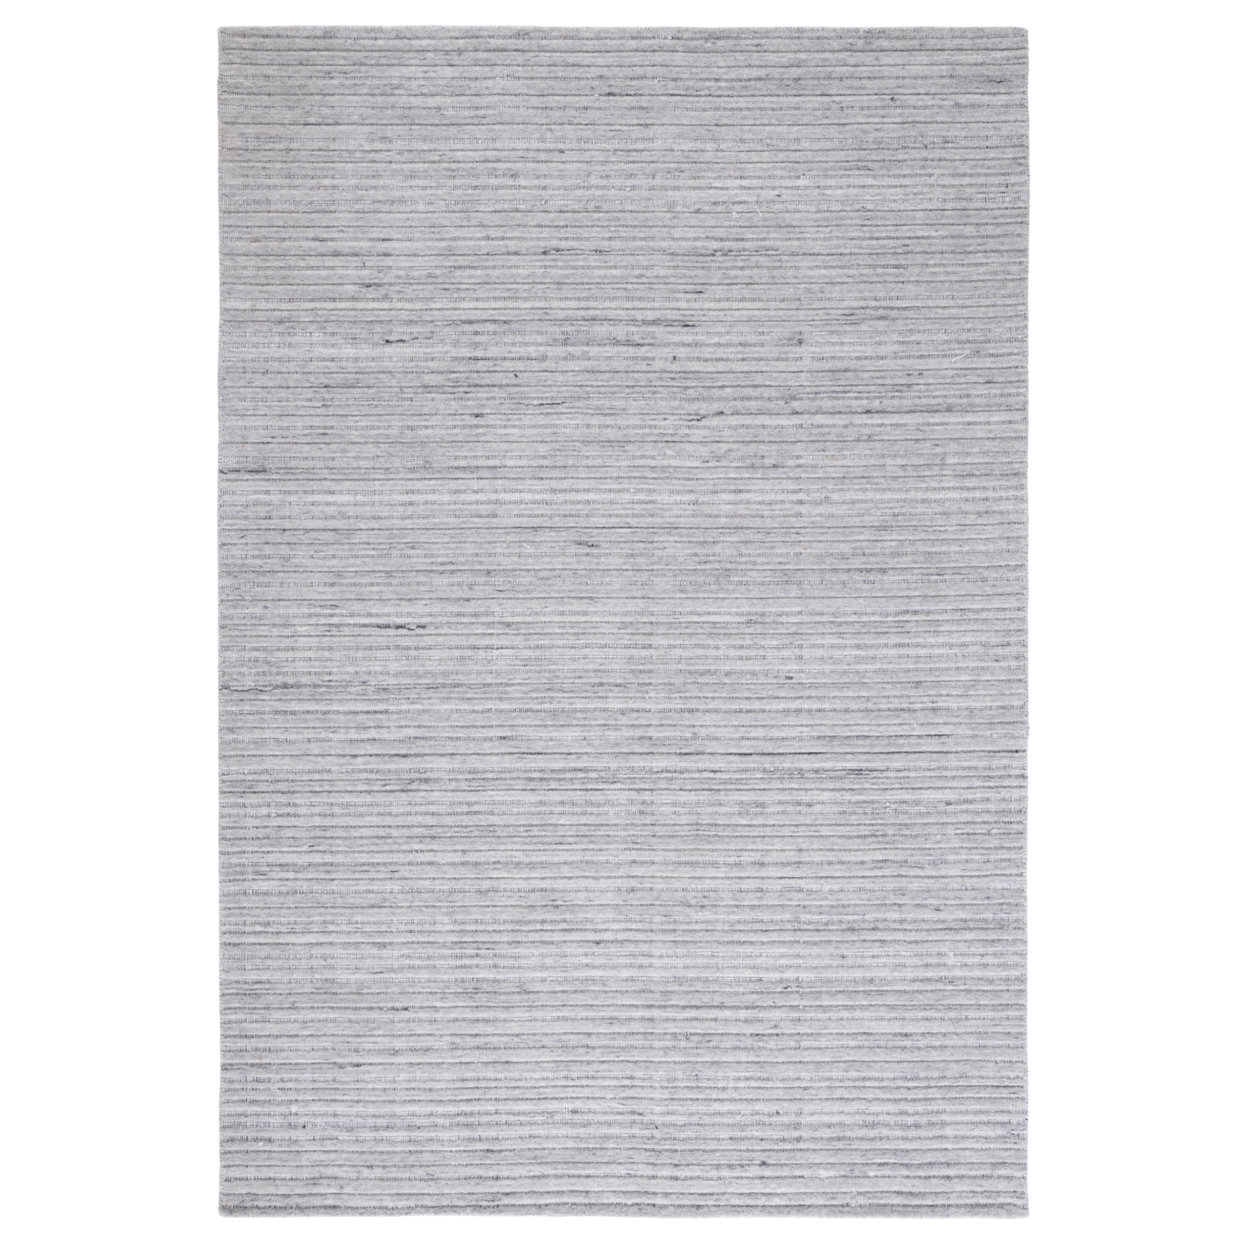 SAFAVIEH Elements Collection ELM701F Handwoven Grey Rug - image 2 of 9